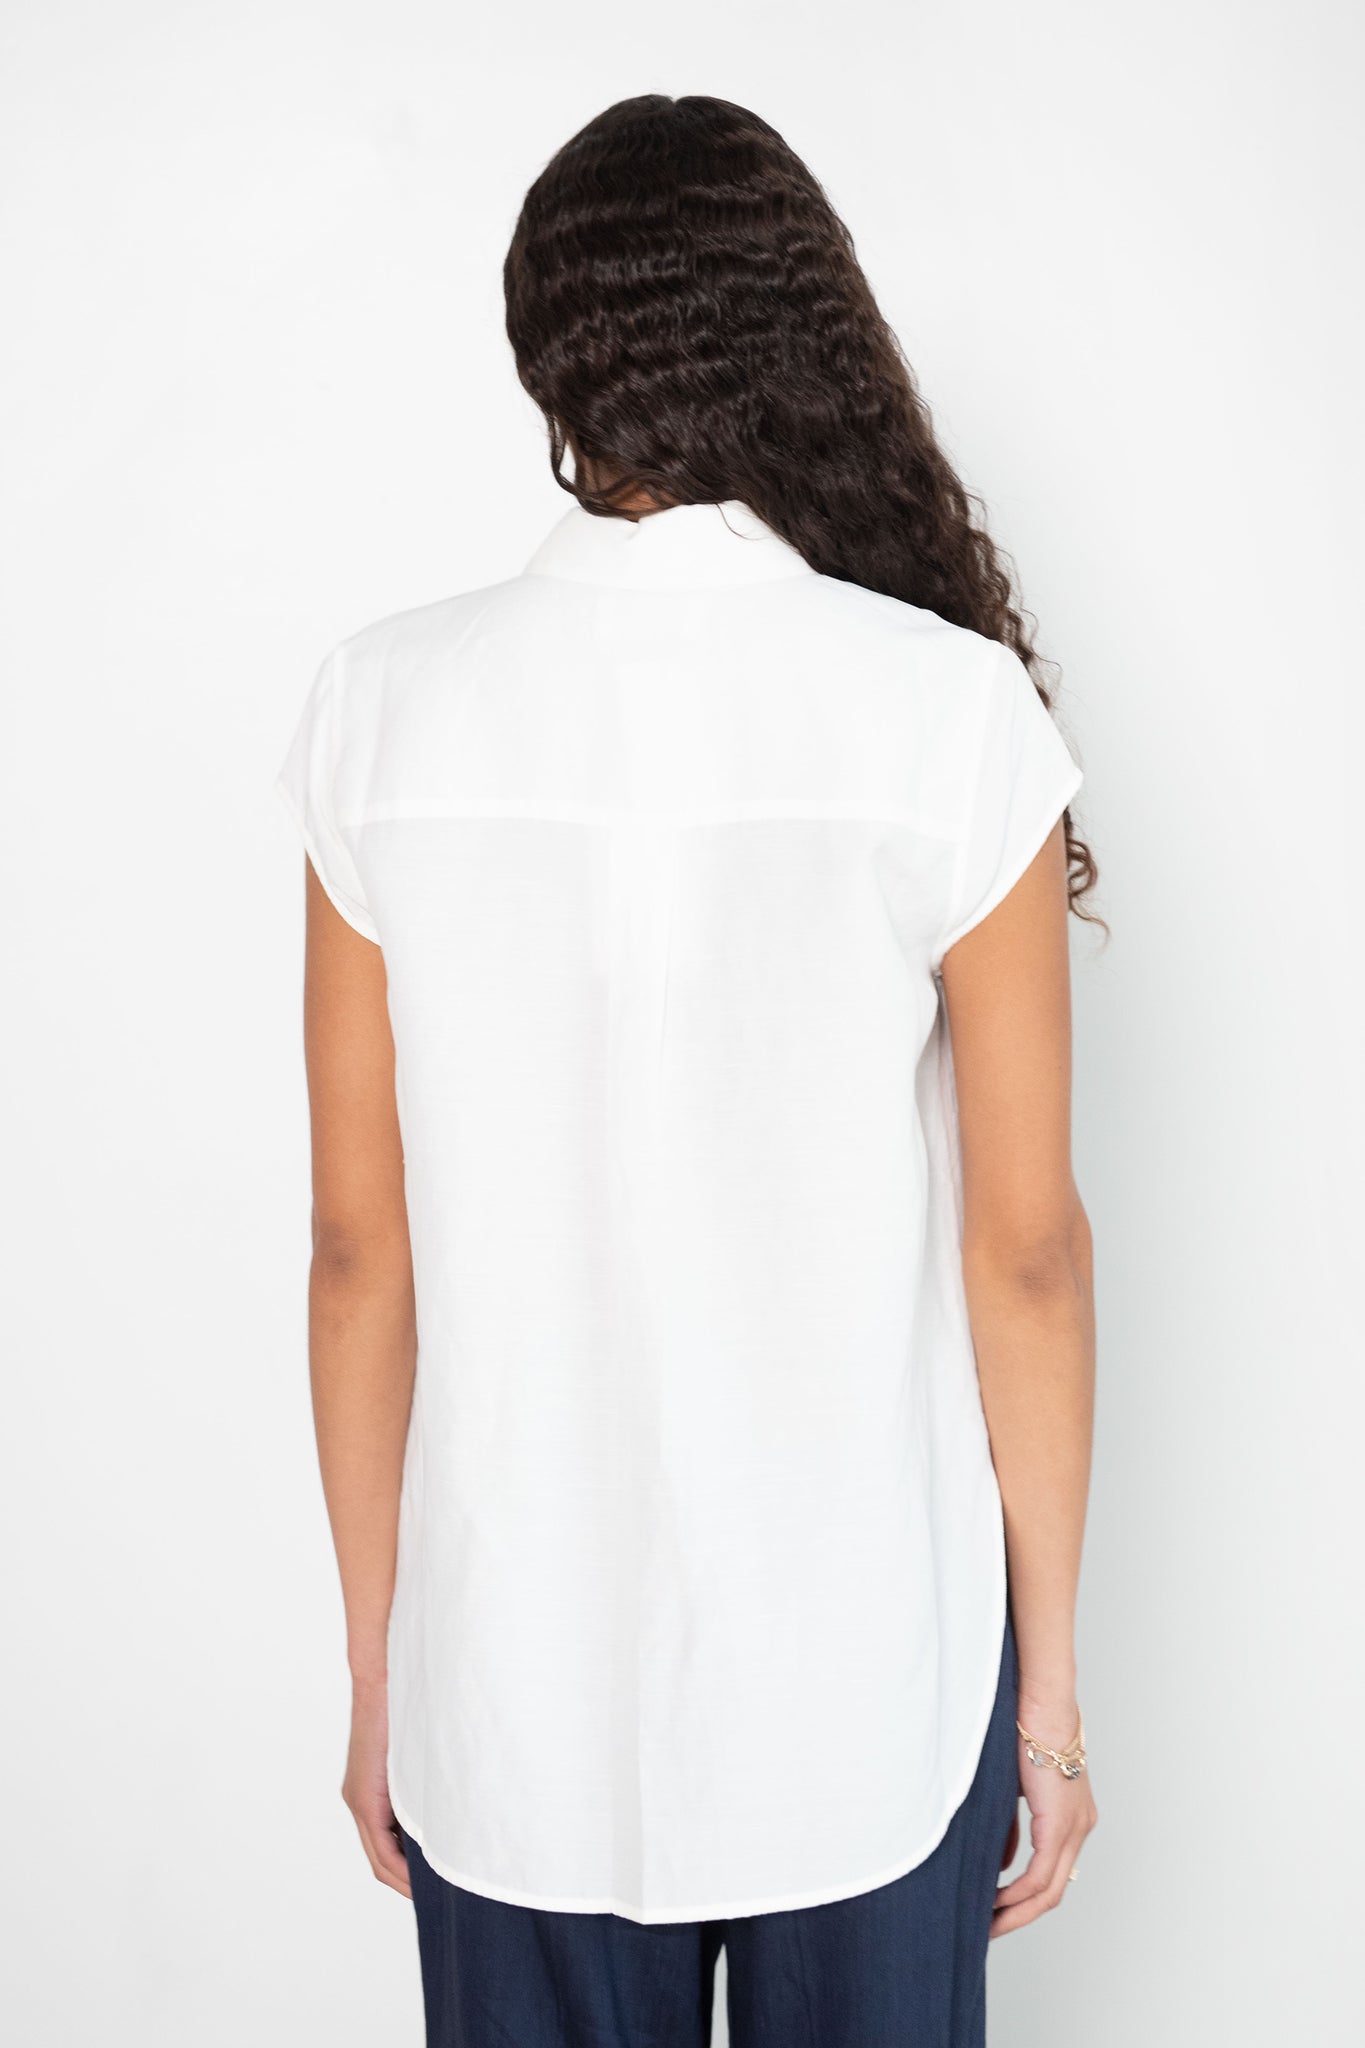 Christian Wijnants - Taung Top, White